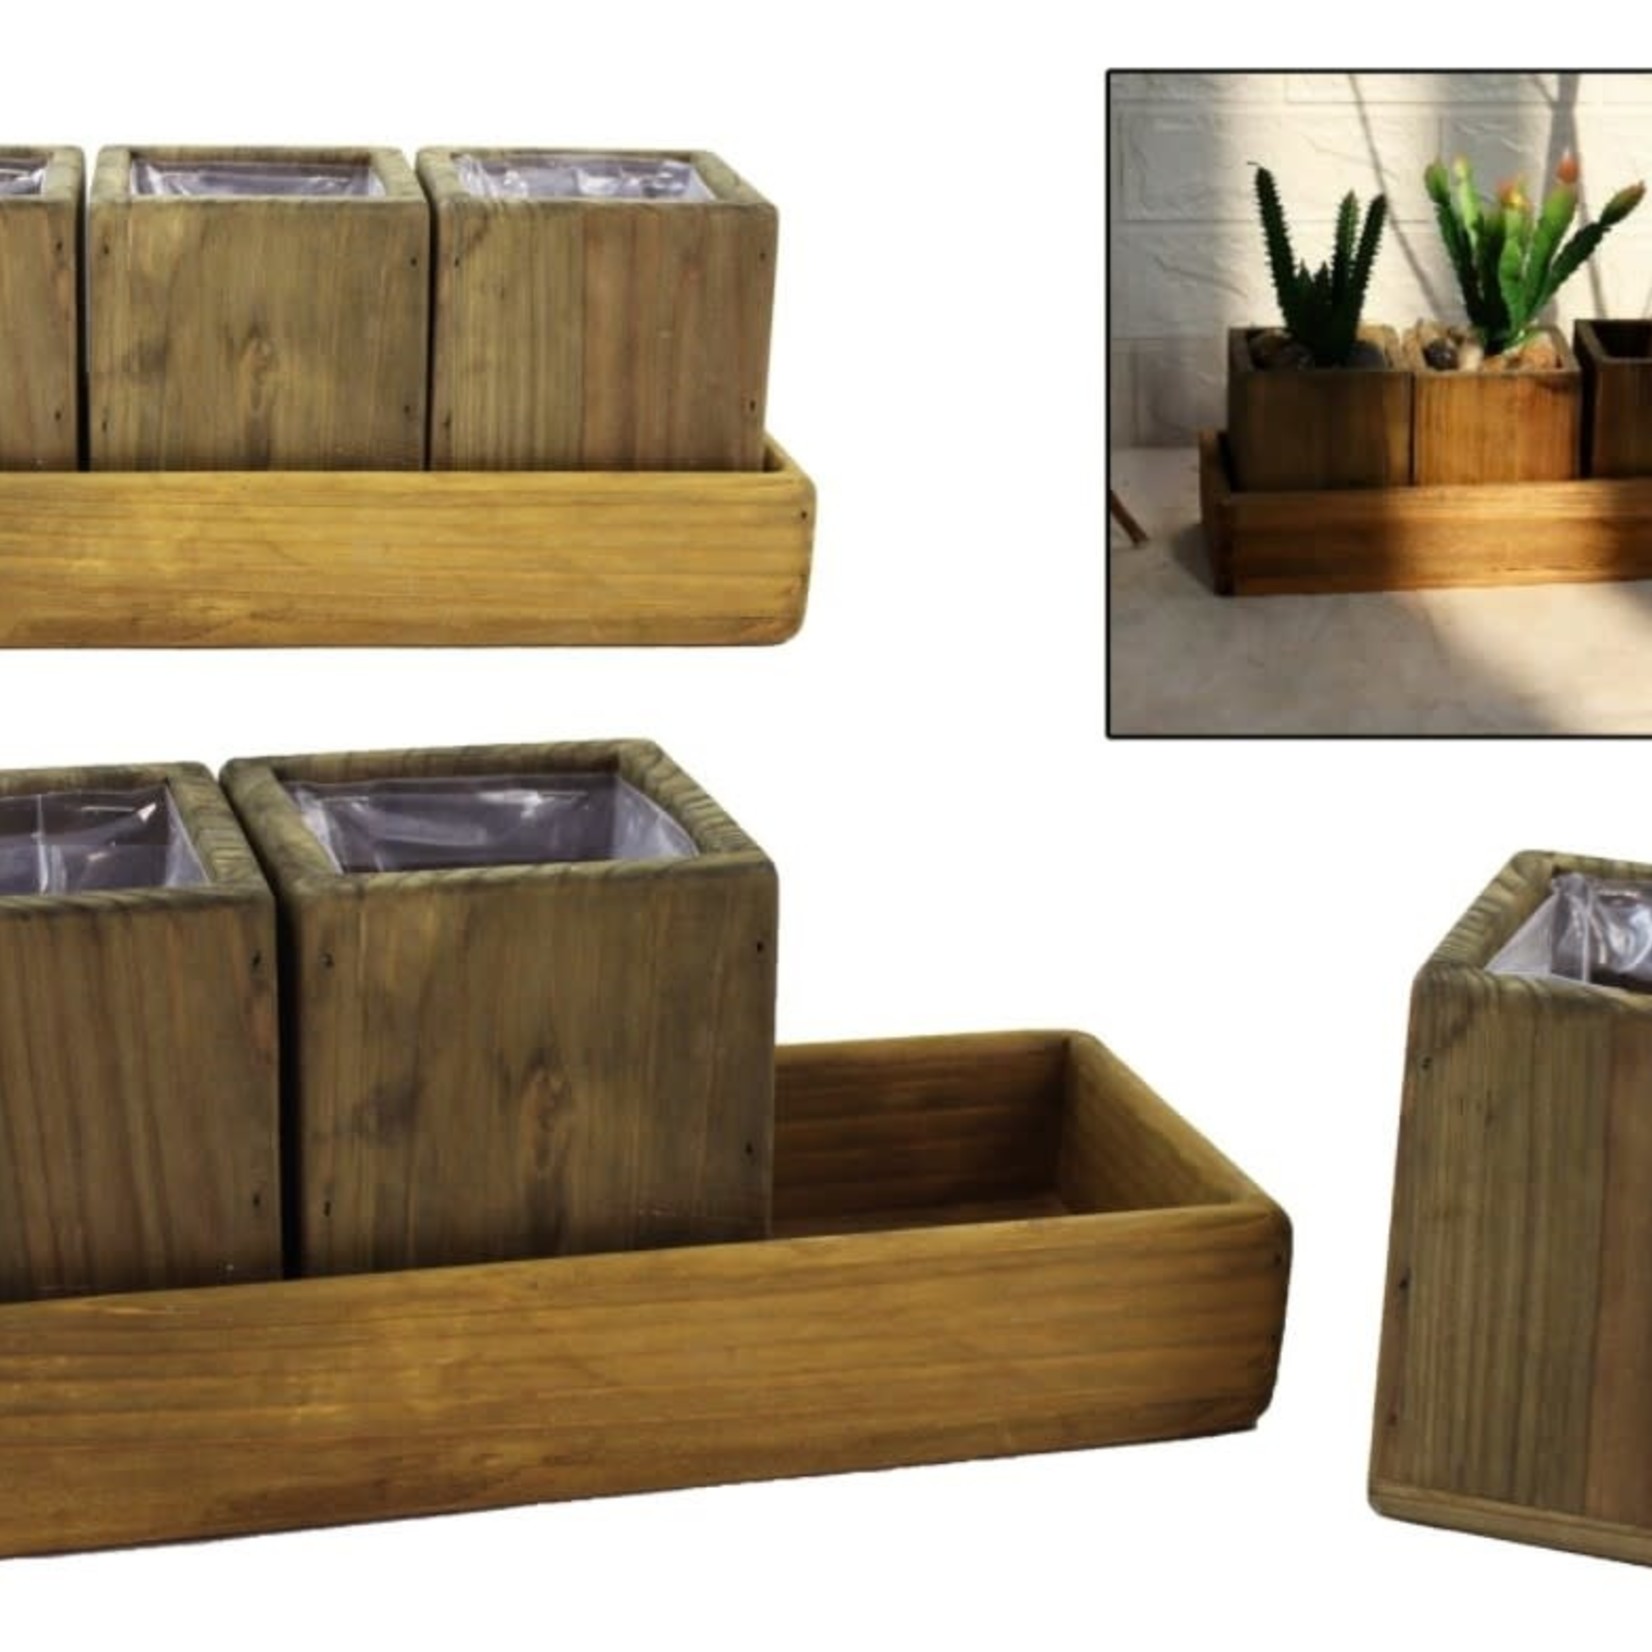 Planters - 3 pc Wood with Tray